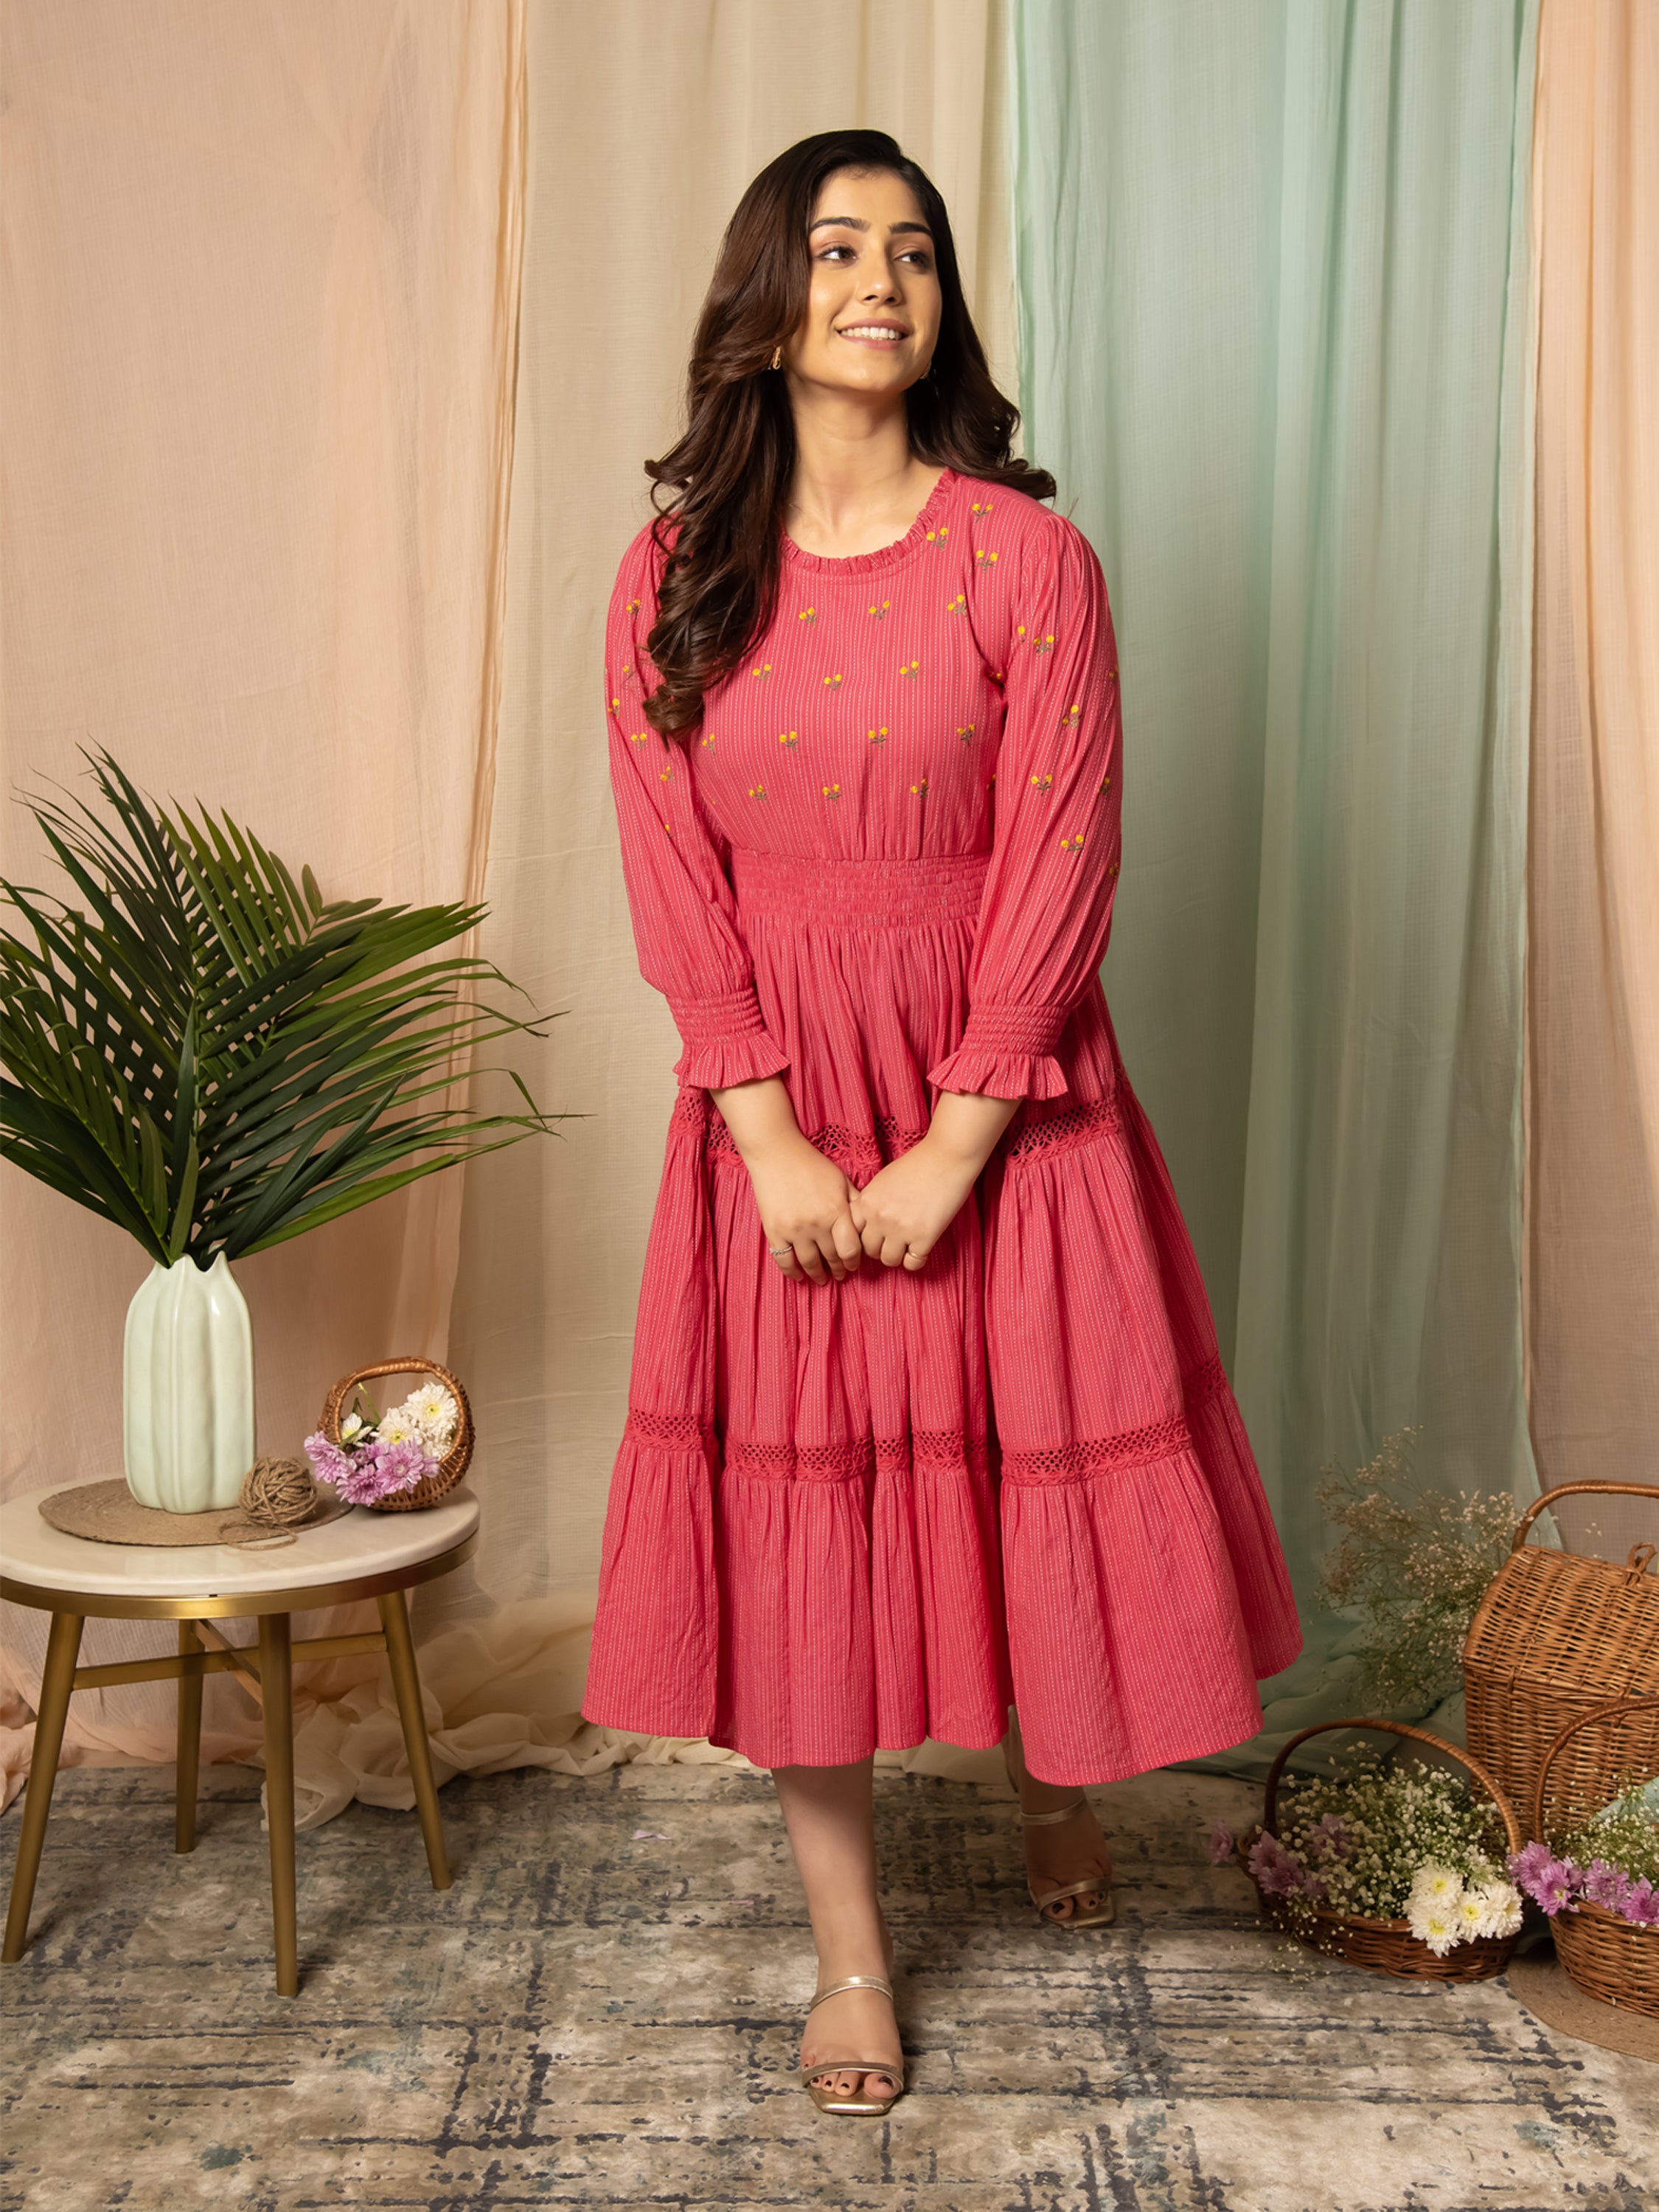 RADIANT MEADOWS CERISE PINK COTTON KANTHA TIERED DRESS